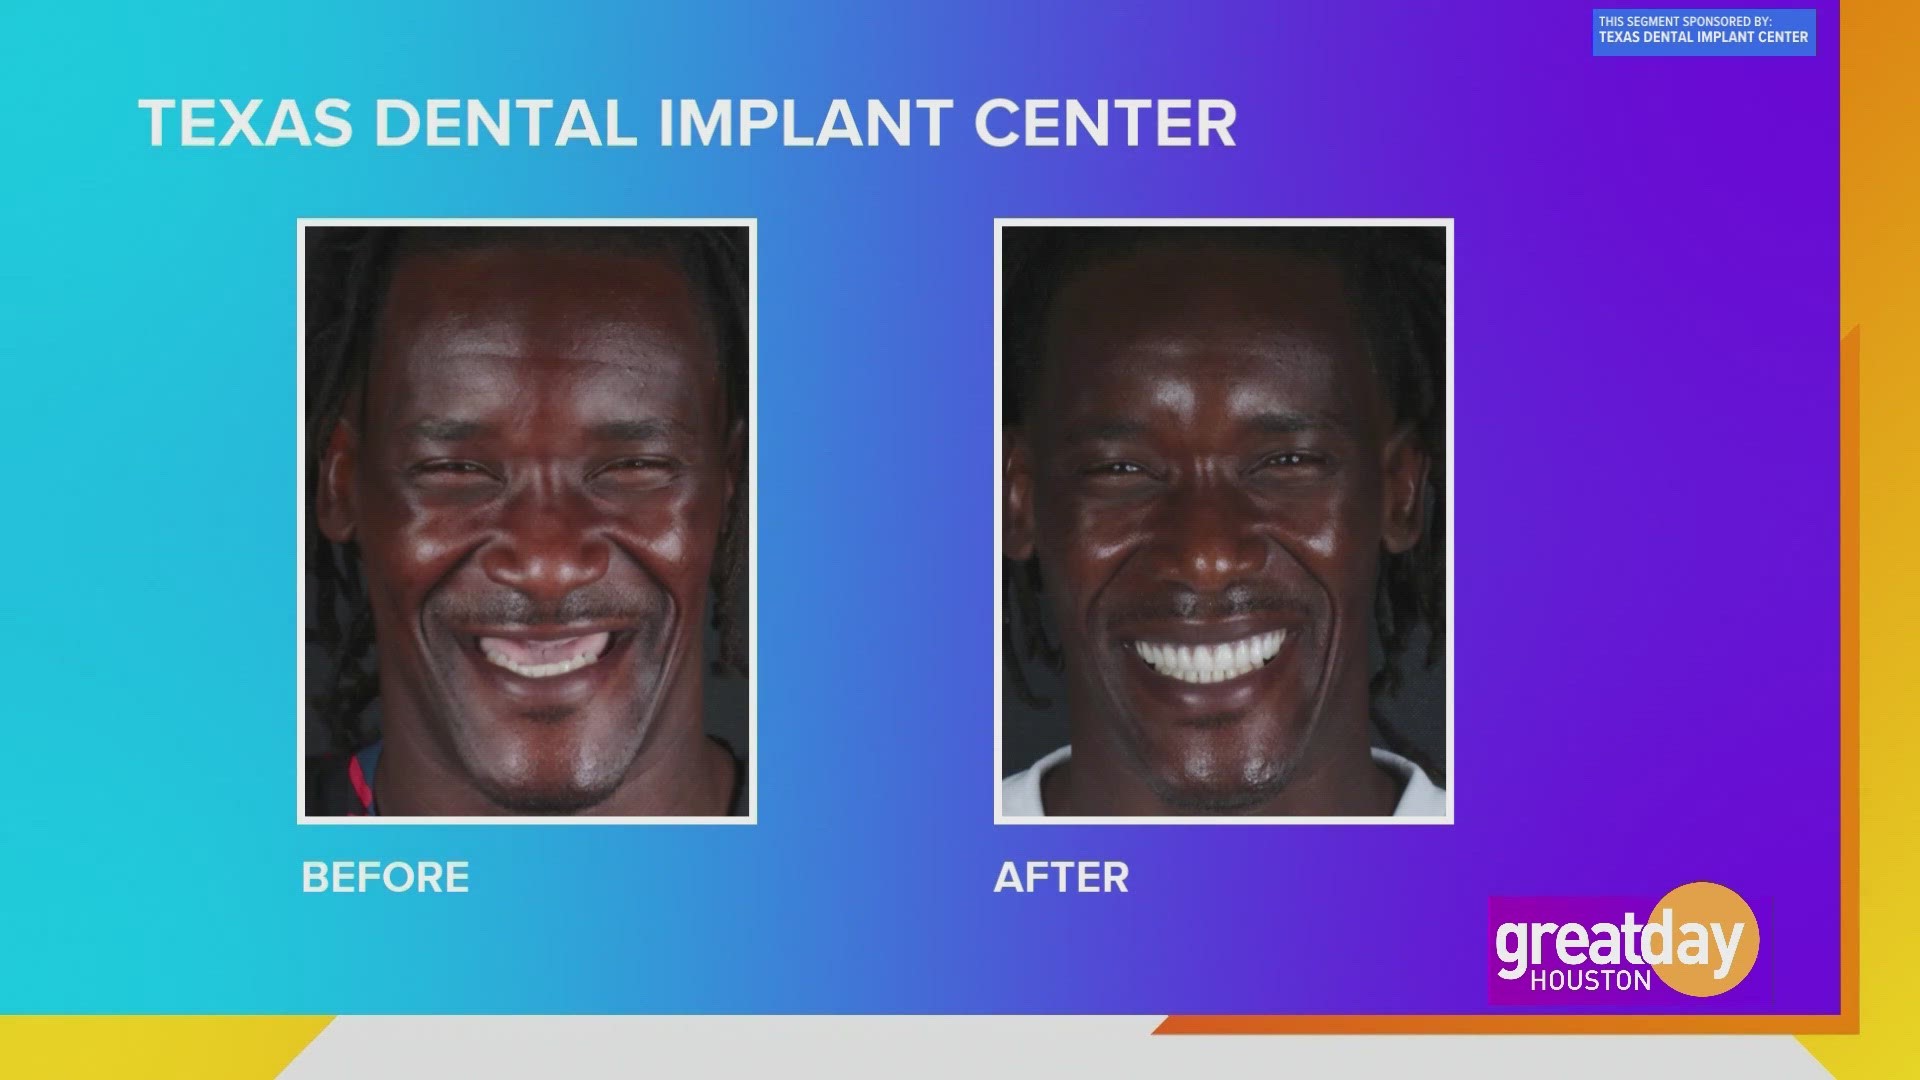 Let the Texas Dental Implant Center can give you the smile and confidence of your dreams.